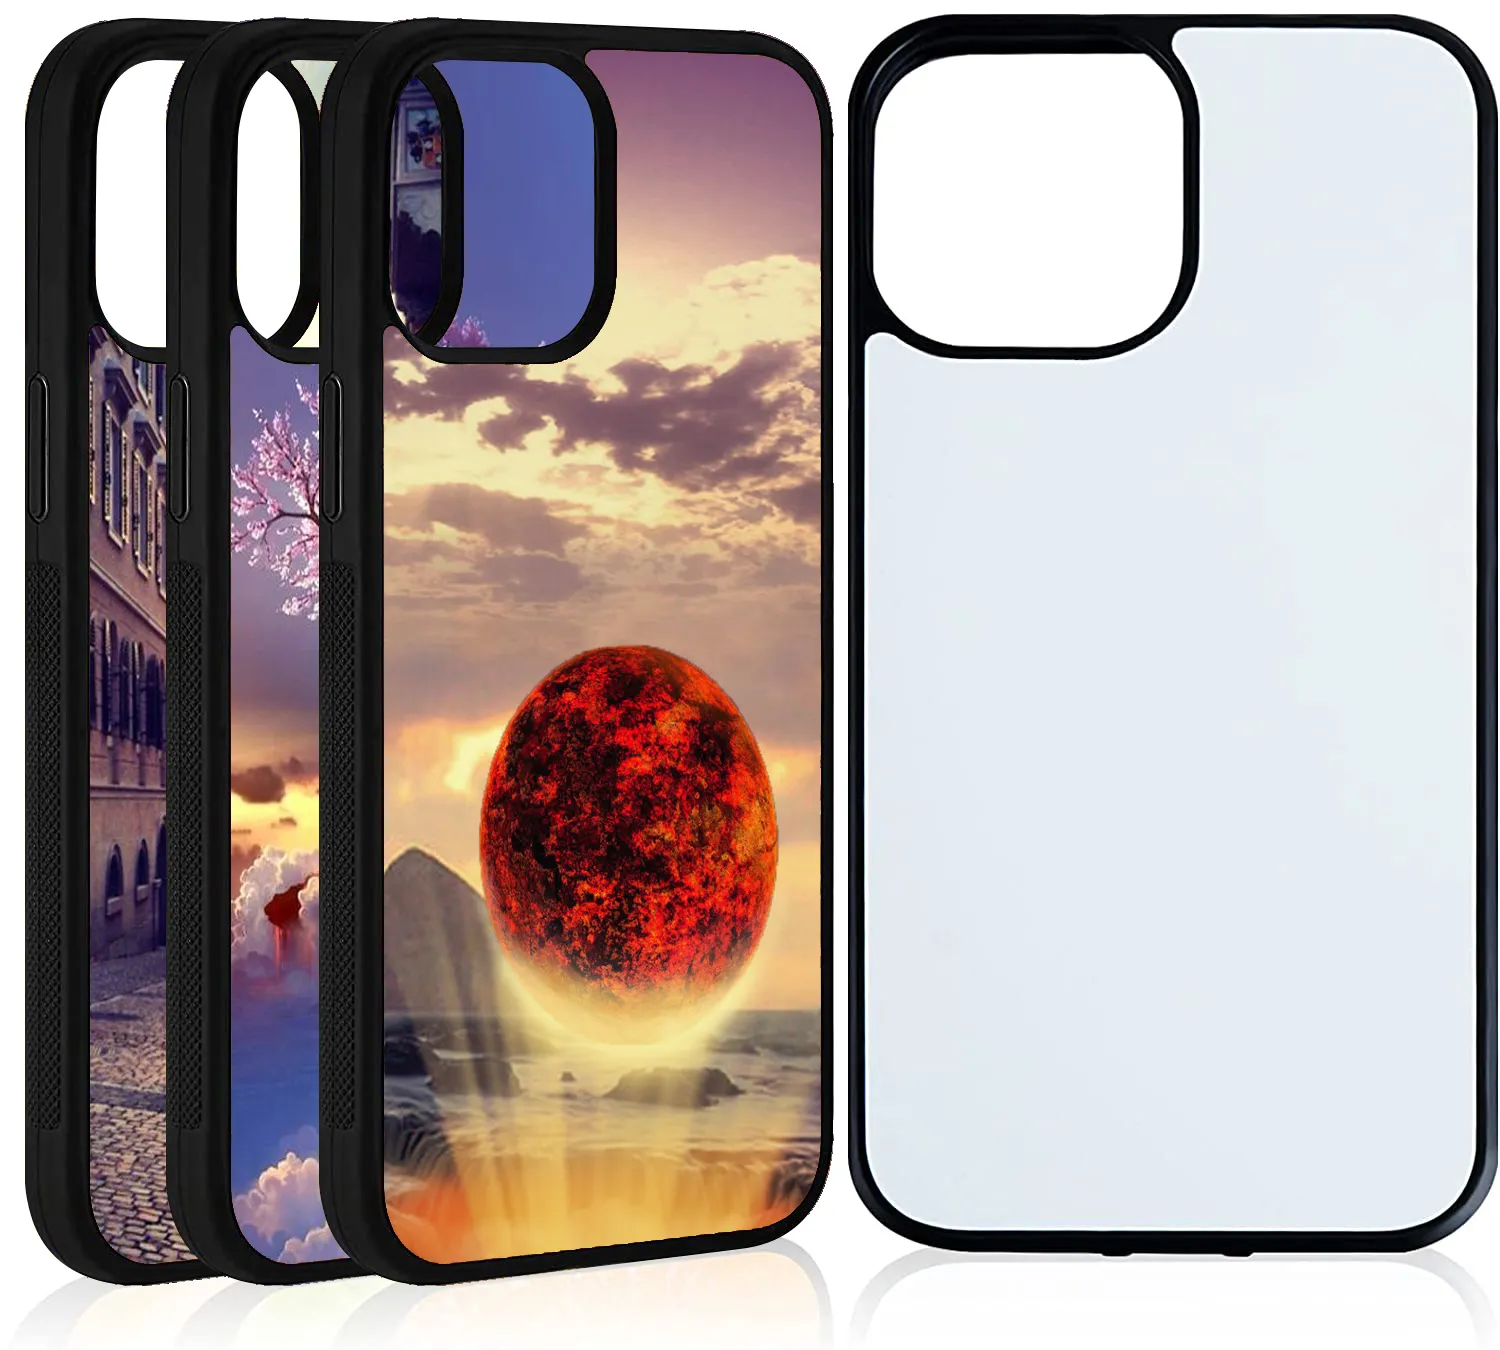 Customized 3D Blank Phone Case For All kinds phone, blank cell phone case,sublimation phone cases blank